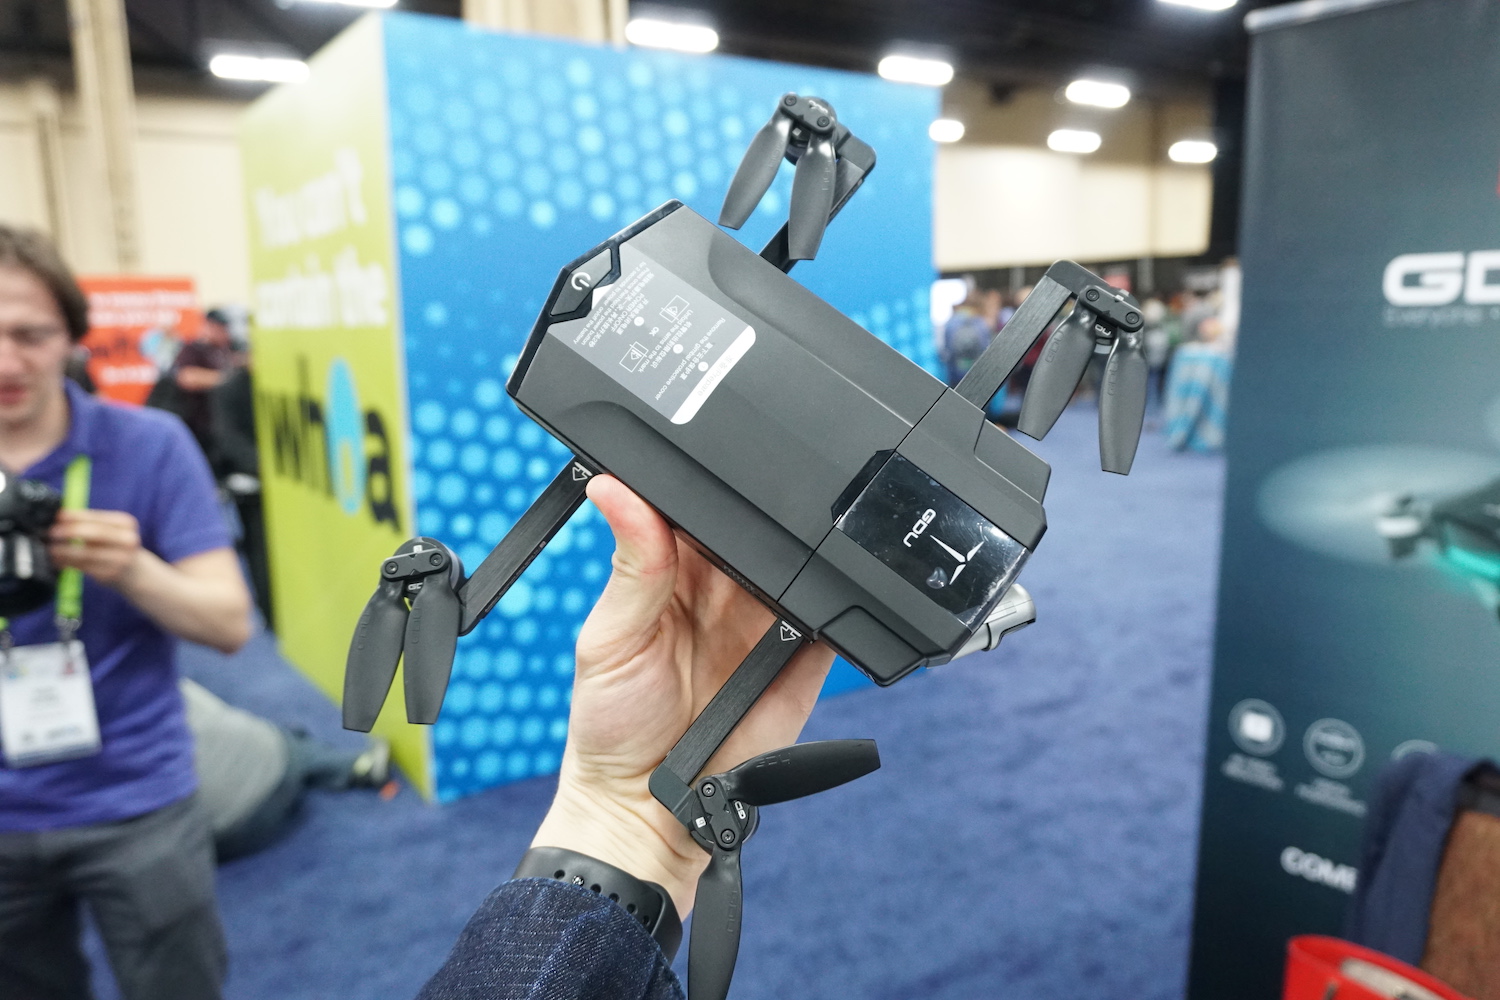 Drones at CES Unveiled 2018 — GDU, Drone Interactive, and Eyesee show latest